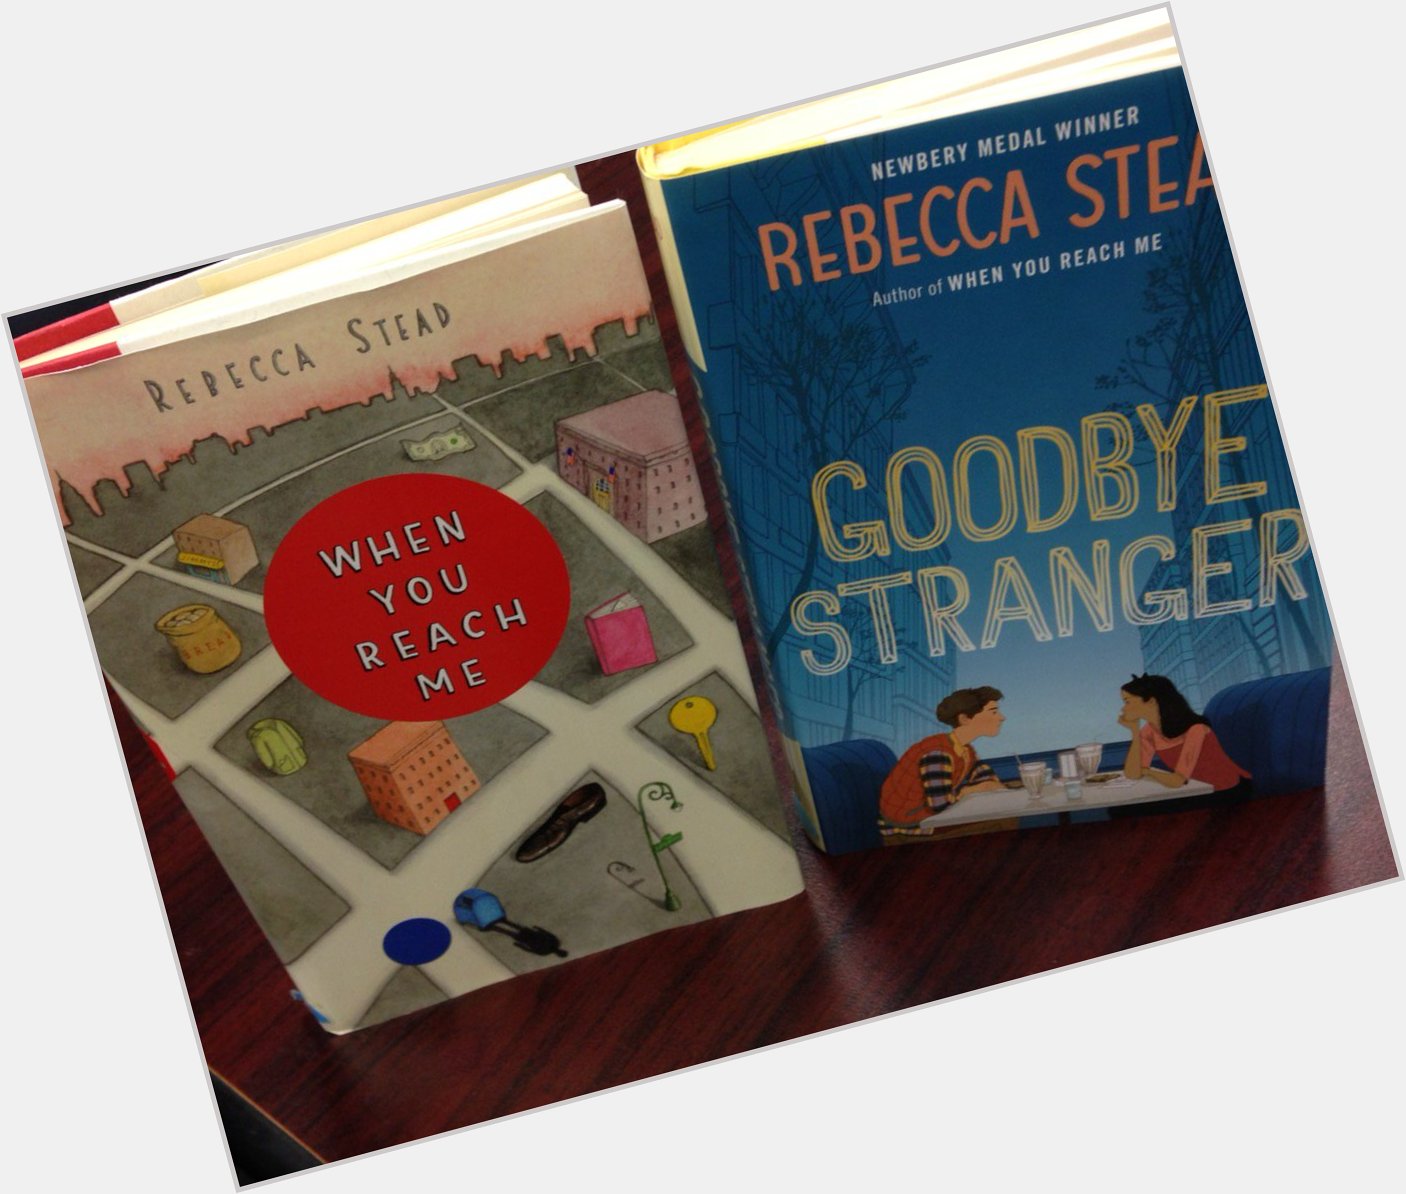 Happy Belated Birthday Rebecca Stead! Come to the Center and read her books! 